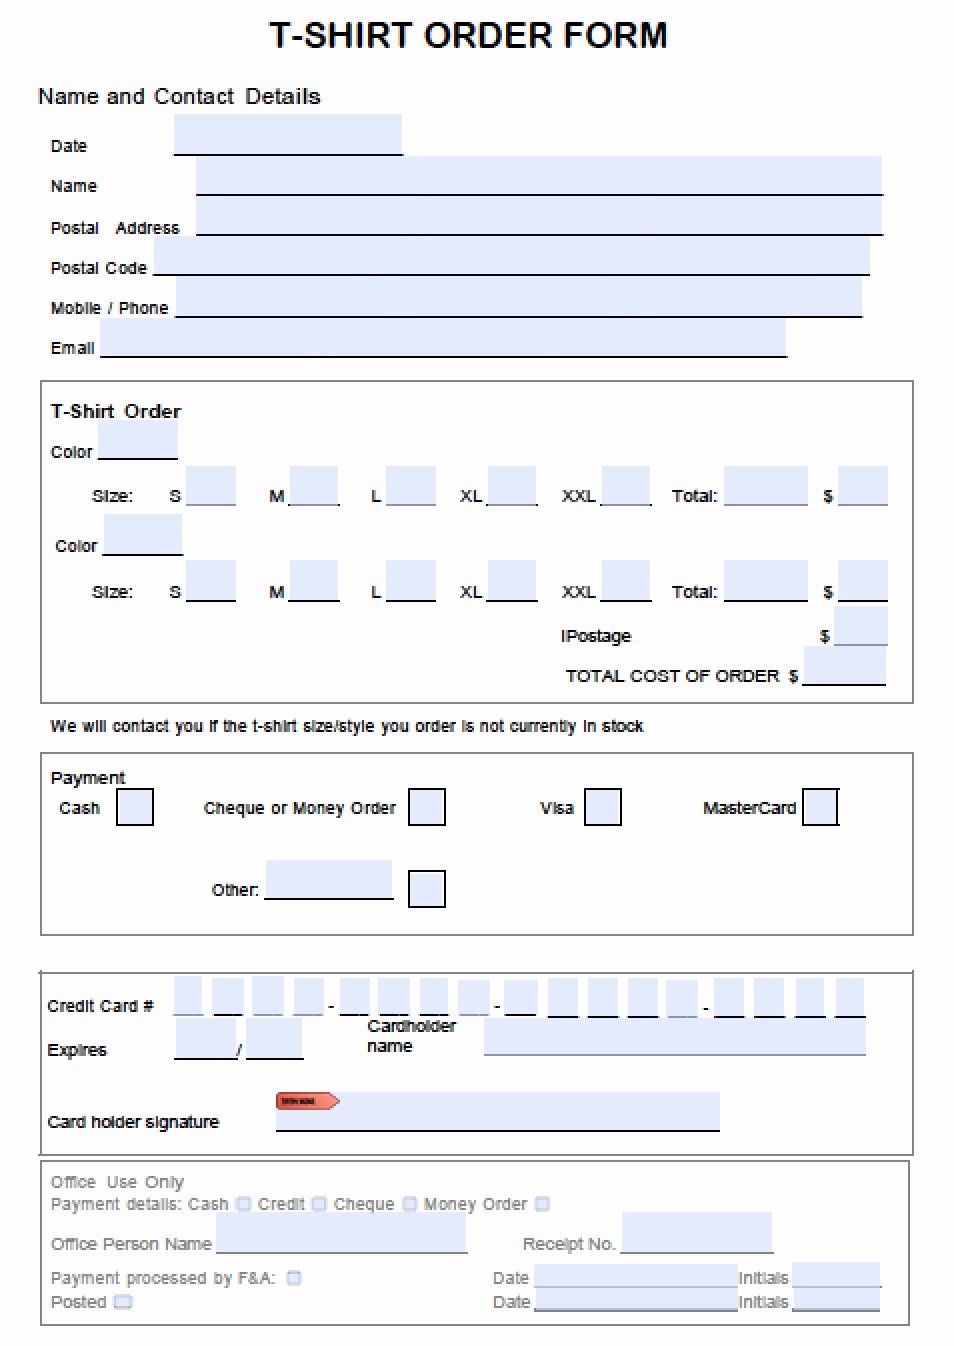 Excel order form Template Luxury T Shirt order form Template